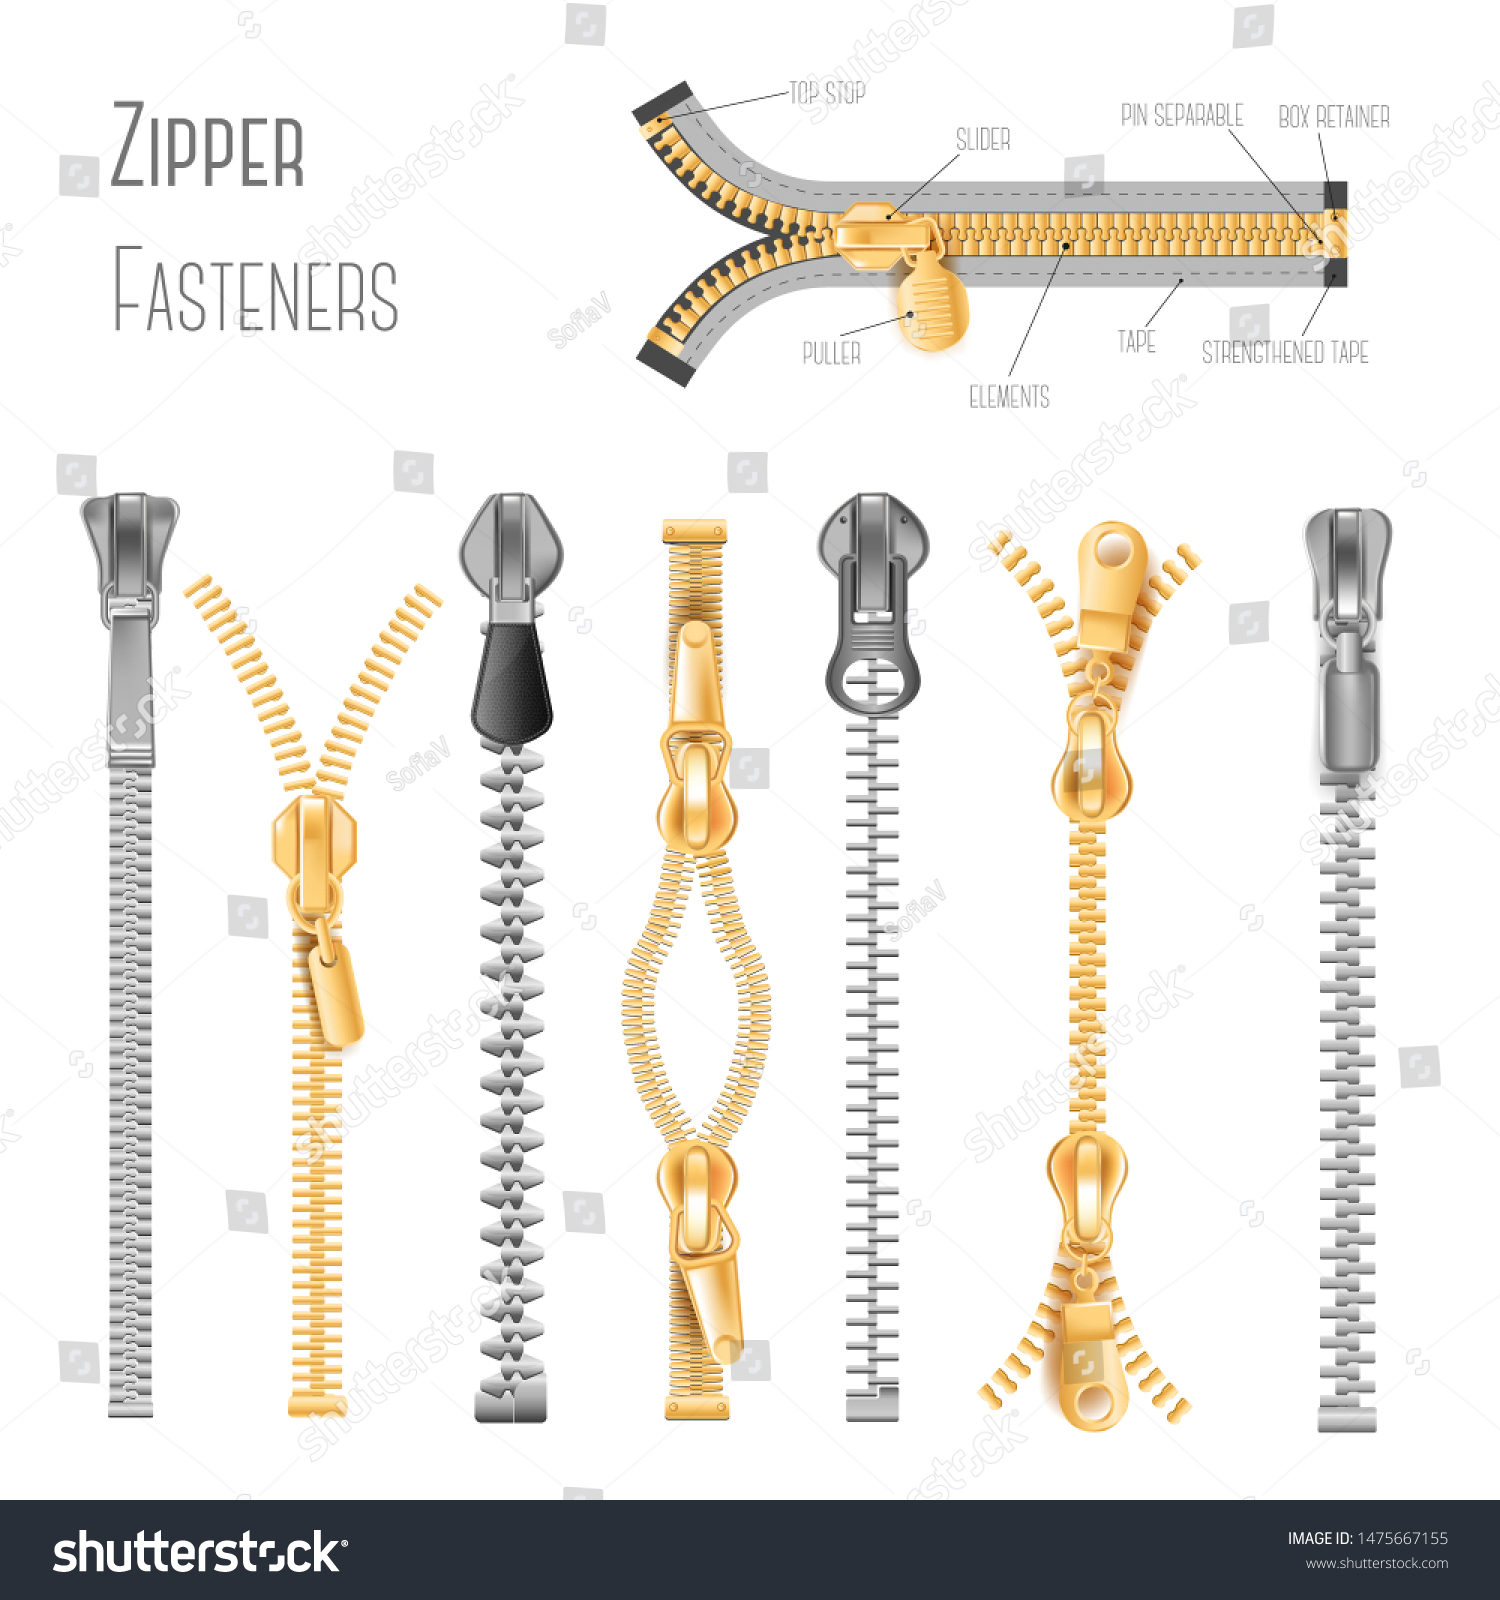 SVG of Metal and plastic fasteners, zippers isolated vector objects. Garment components and handbag accessories, realistic zippered accessories. Close and open positions, golden and silver, metallic pullers svg